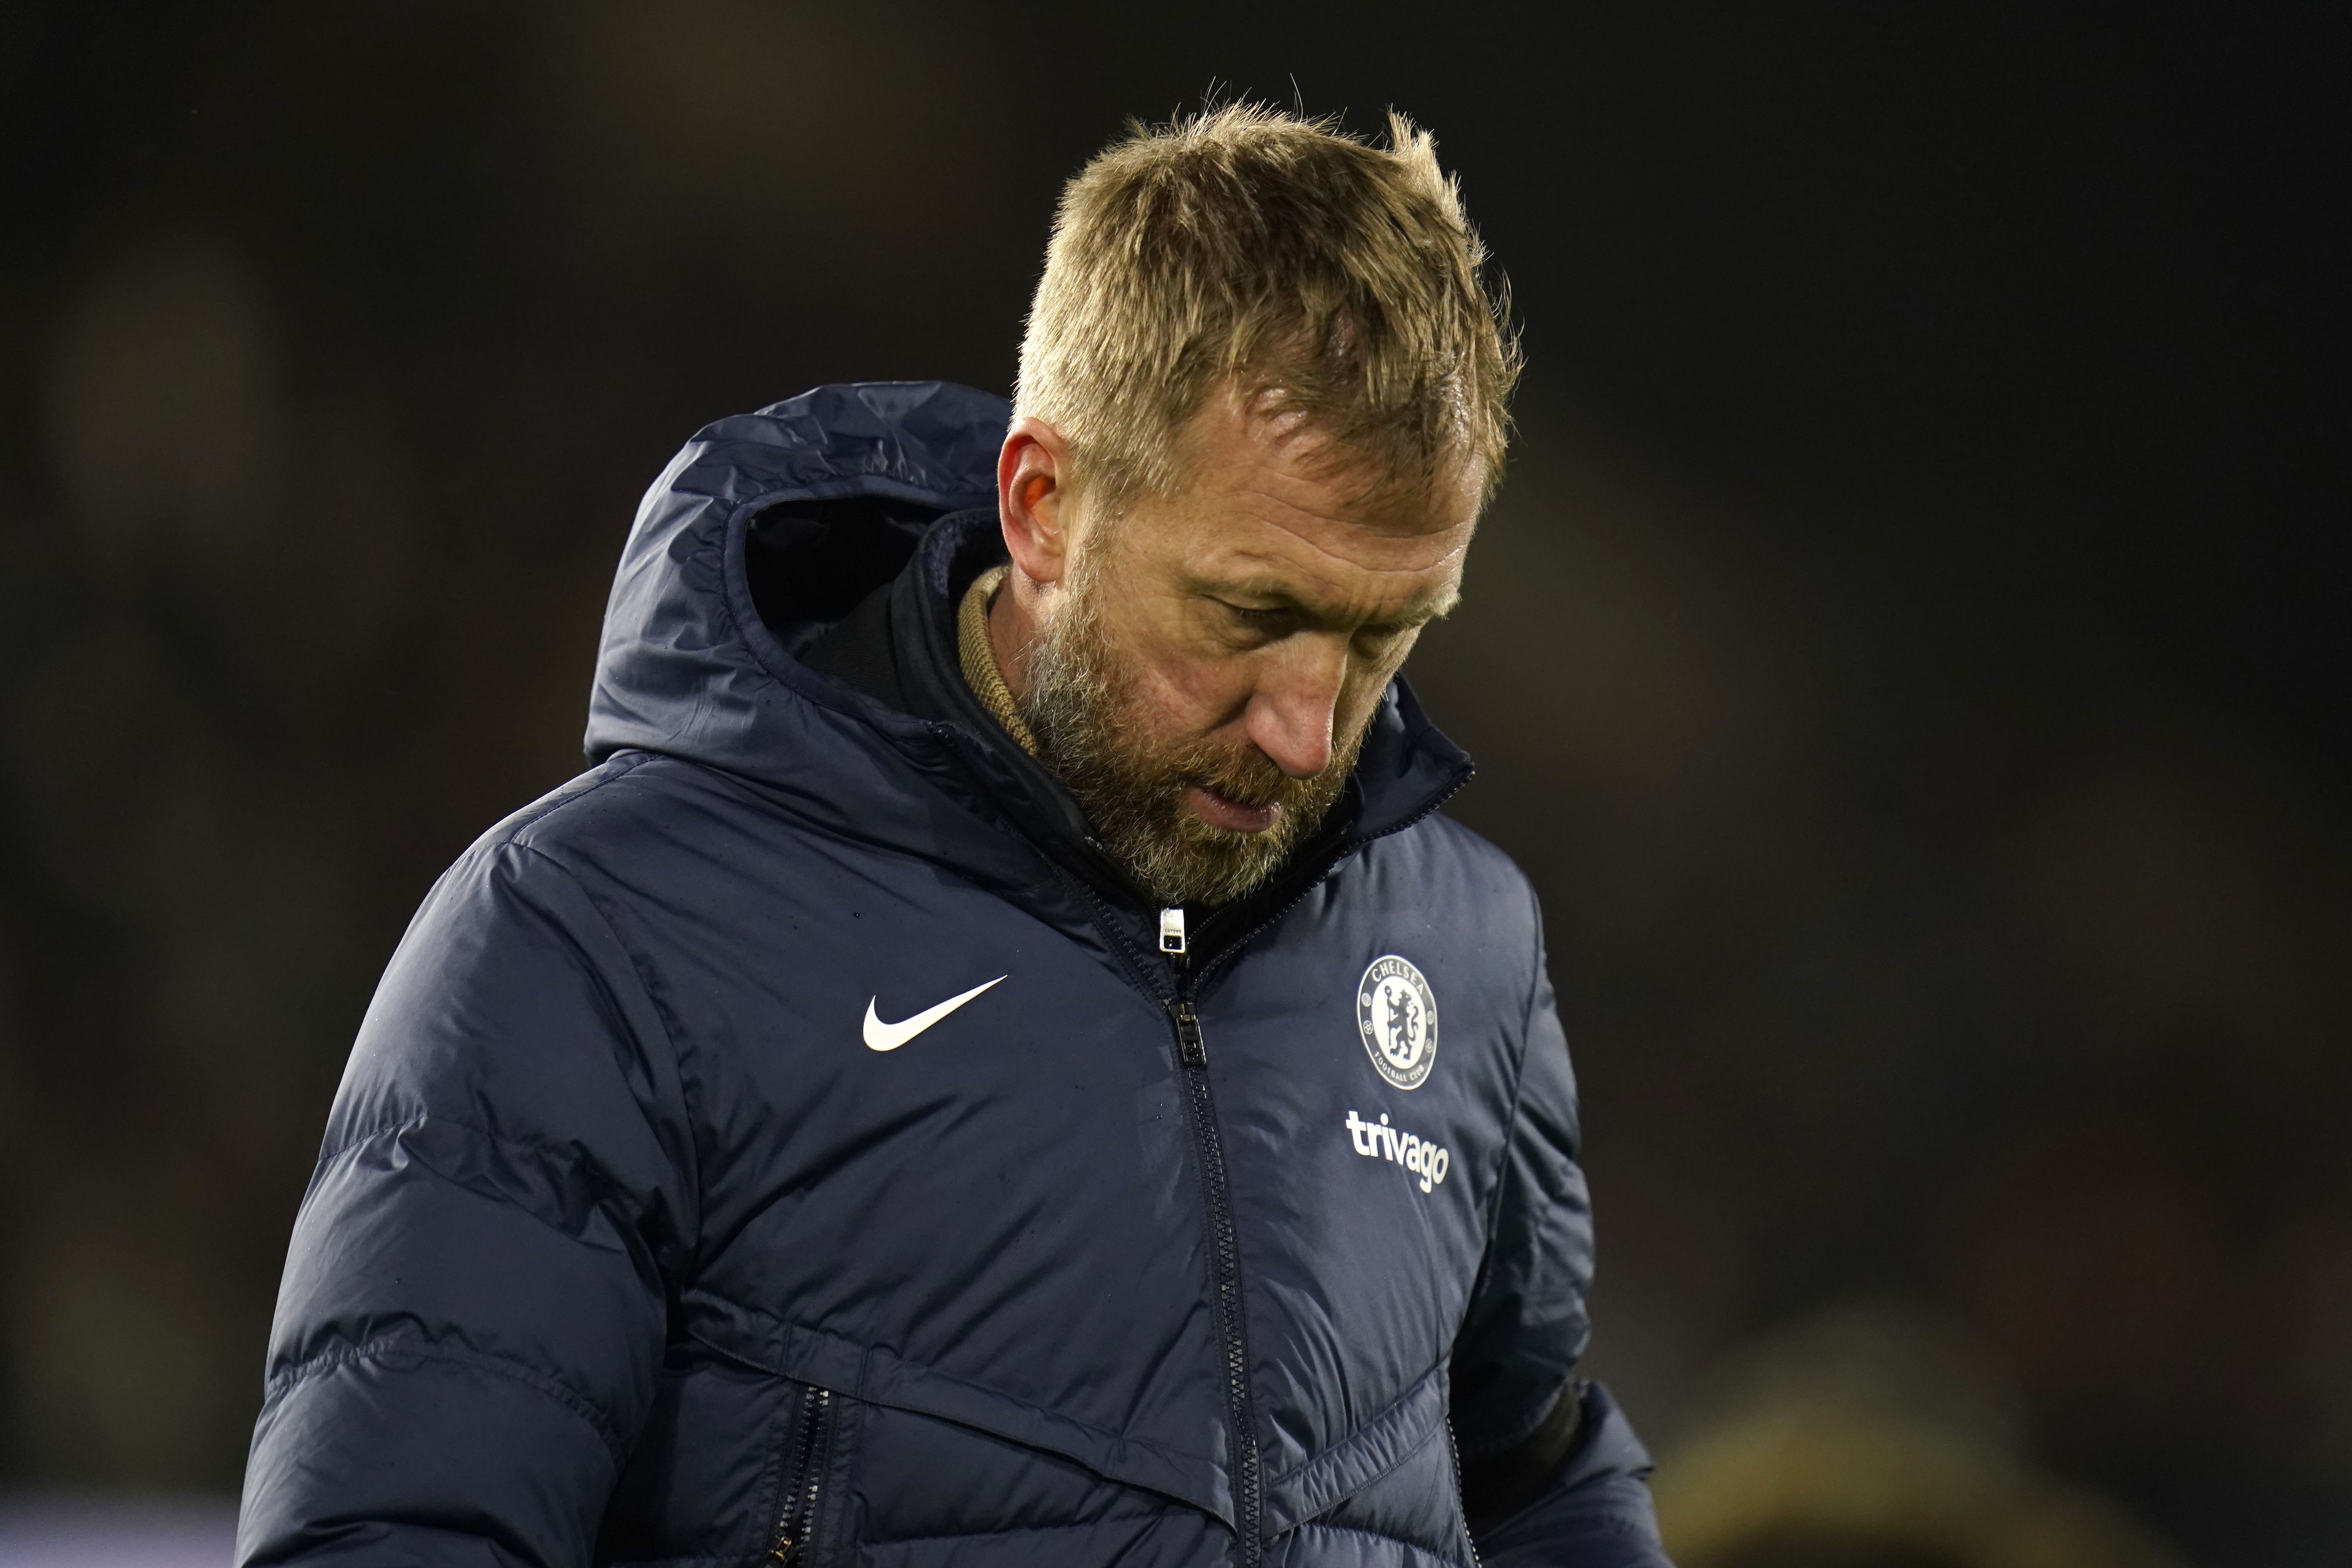 Graham Potter admitted it was “tough to see any light” after Chelsea’s 2-1 defeat at Fulham (Andrew Matthews/PA)